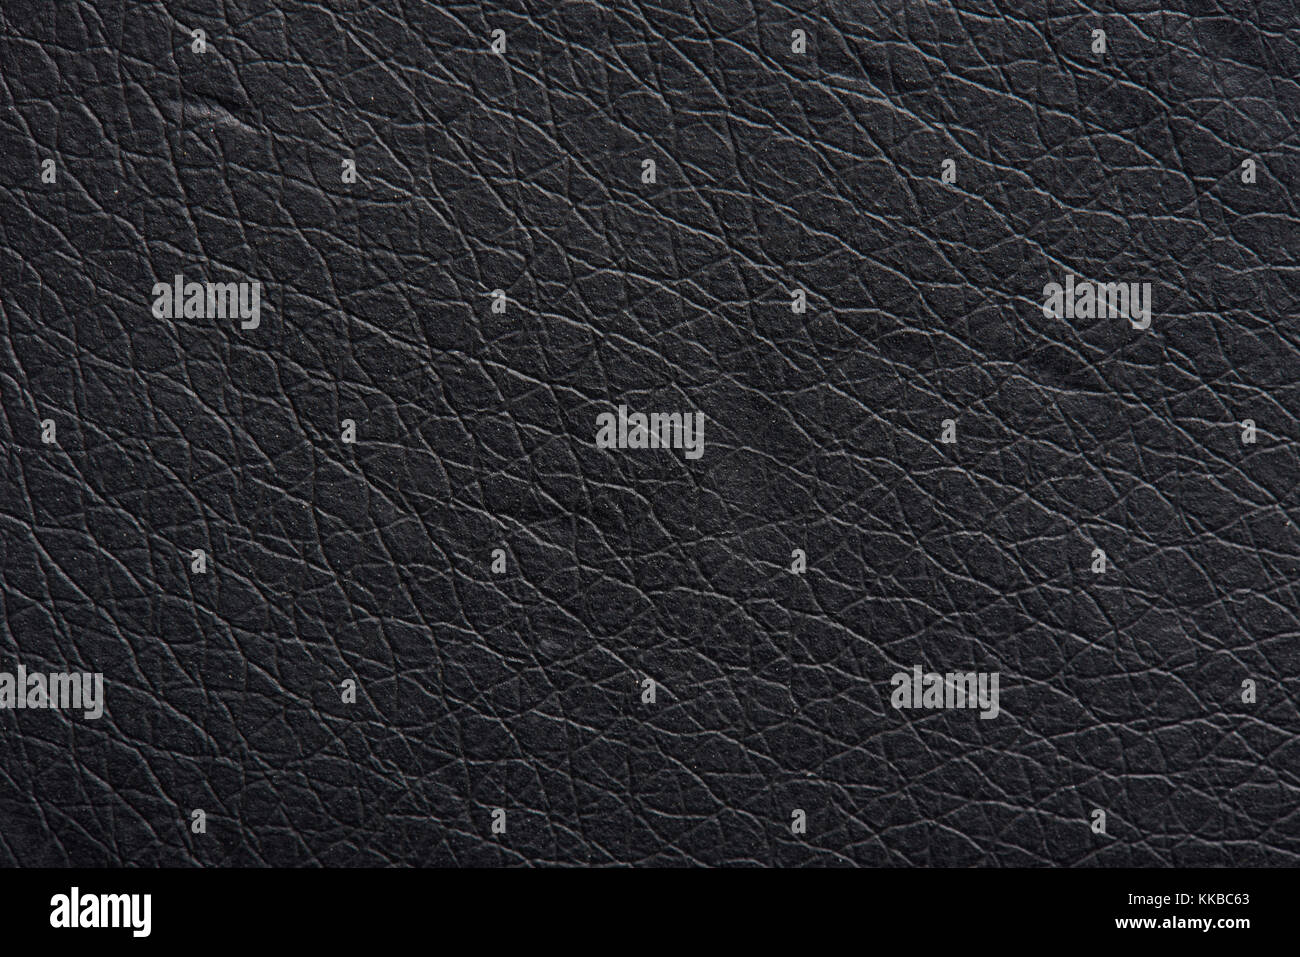 Black leather texture material close-up. Cow skin dark pattern Stock Photo